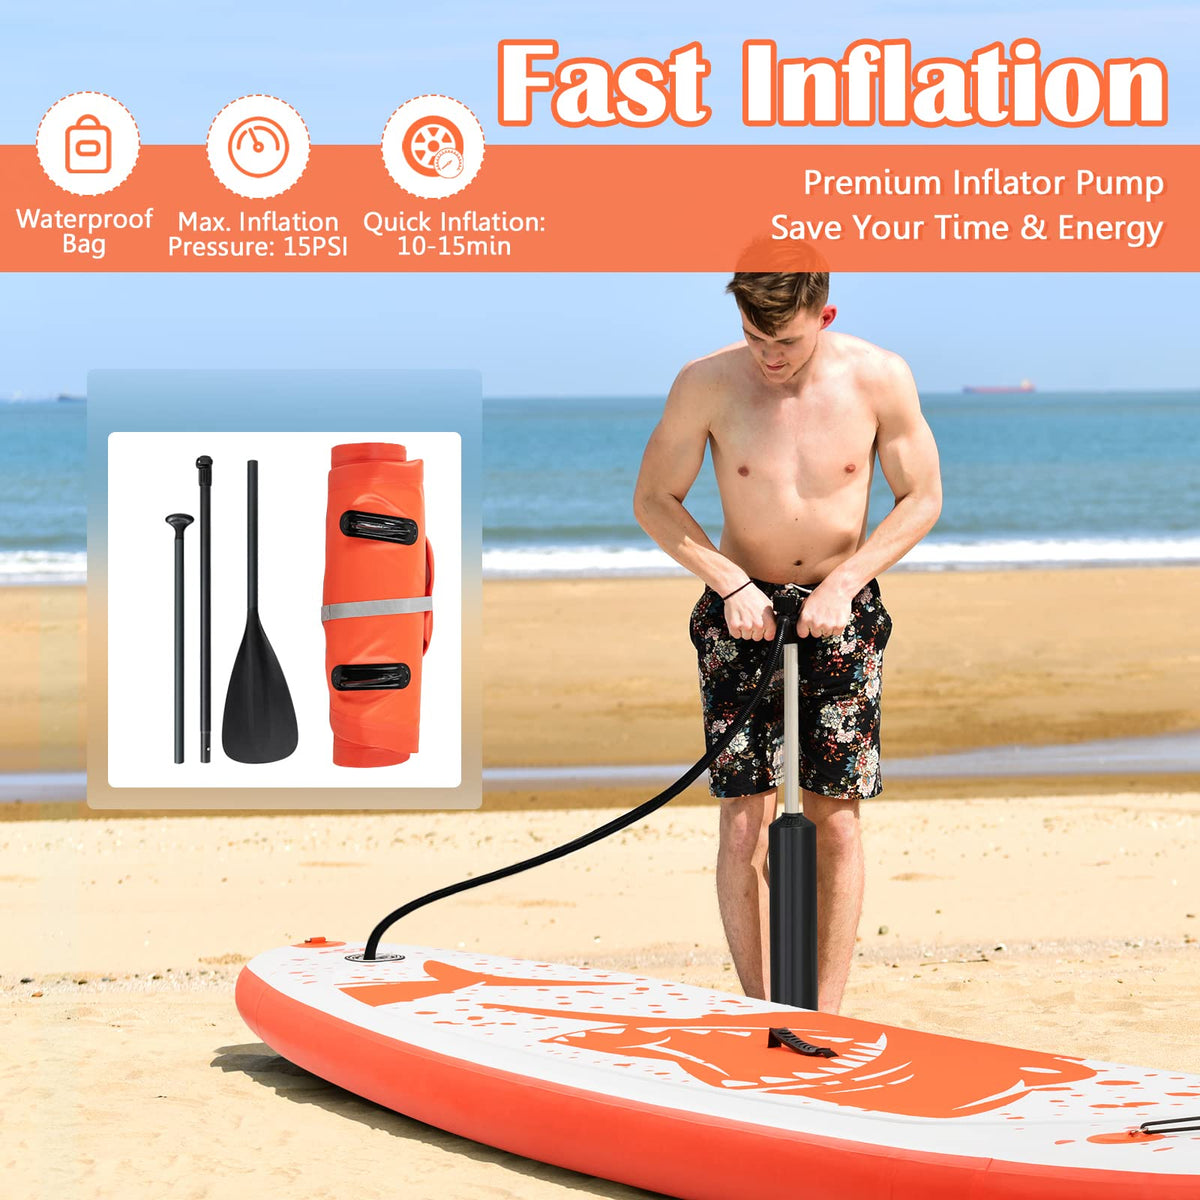 11ft Inflatable Stand Up Paddle Board, 15cm Thick SUP with Premium Accessories, Standing Boat for Youth & Adult